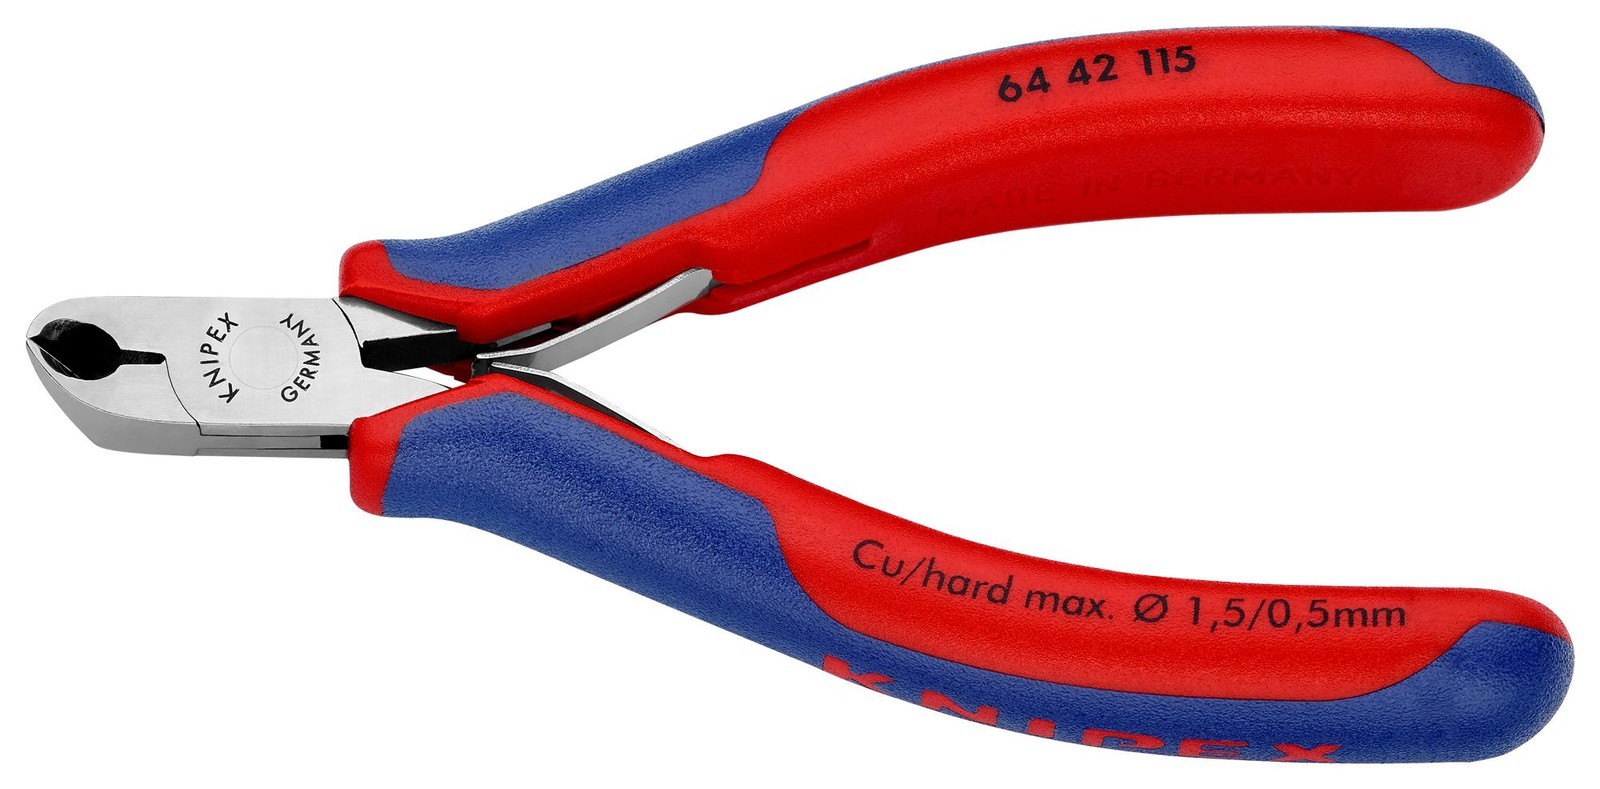 Knipex 64 42 115 Cutter, Oblique, 115mm